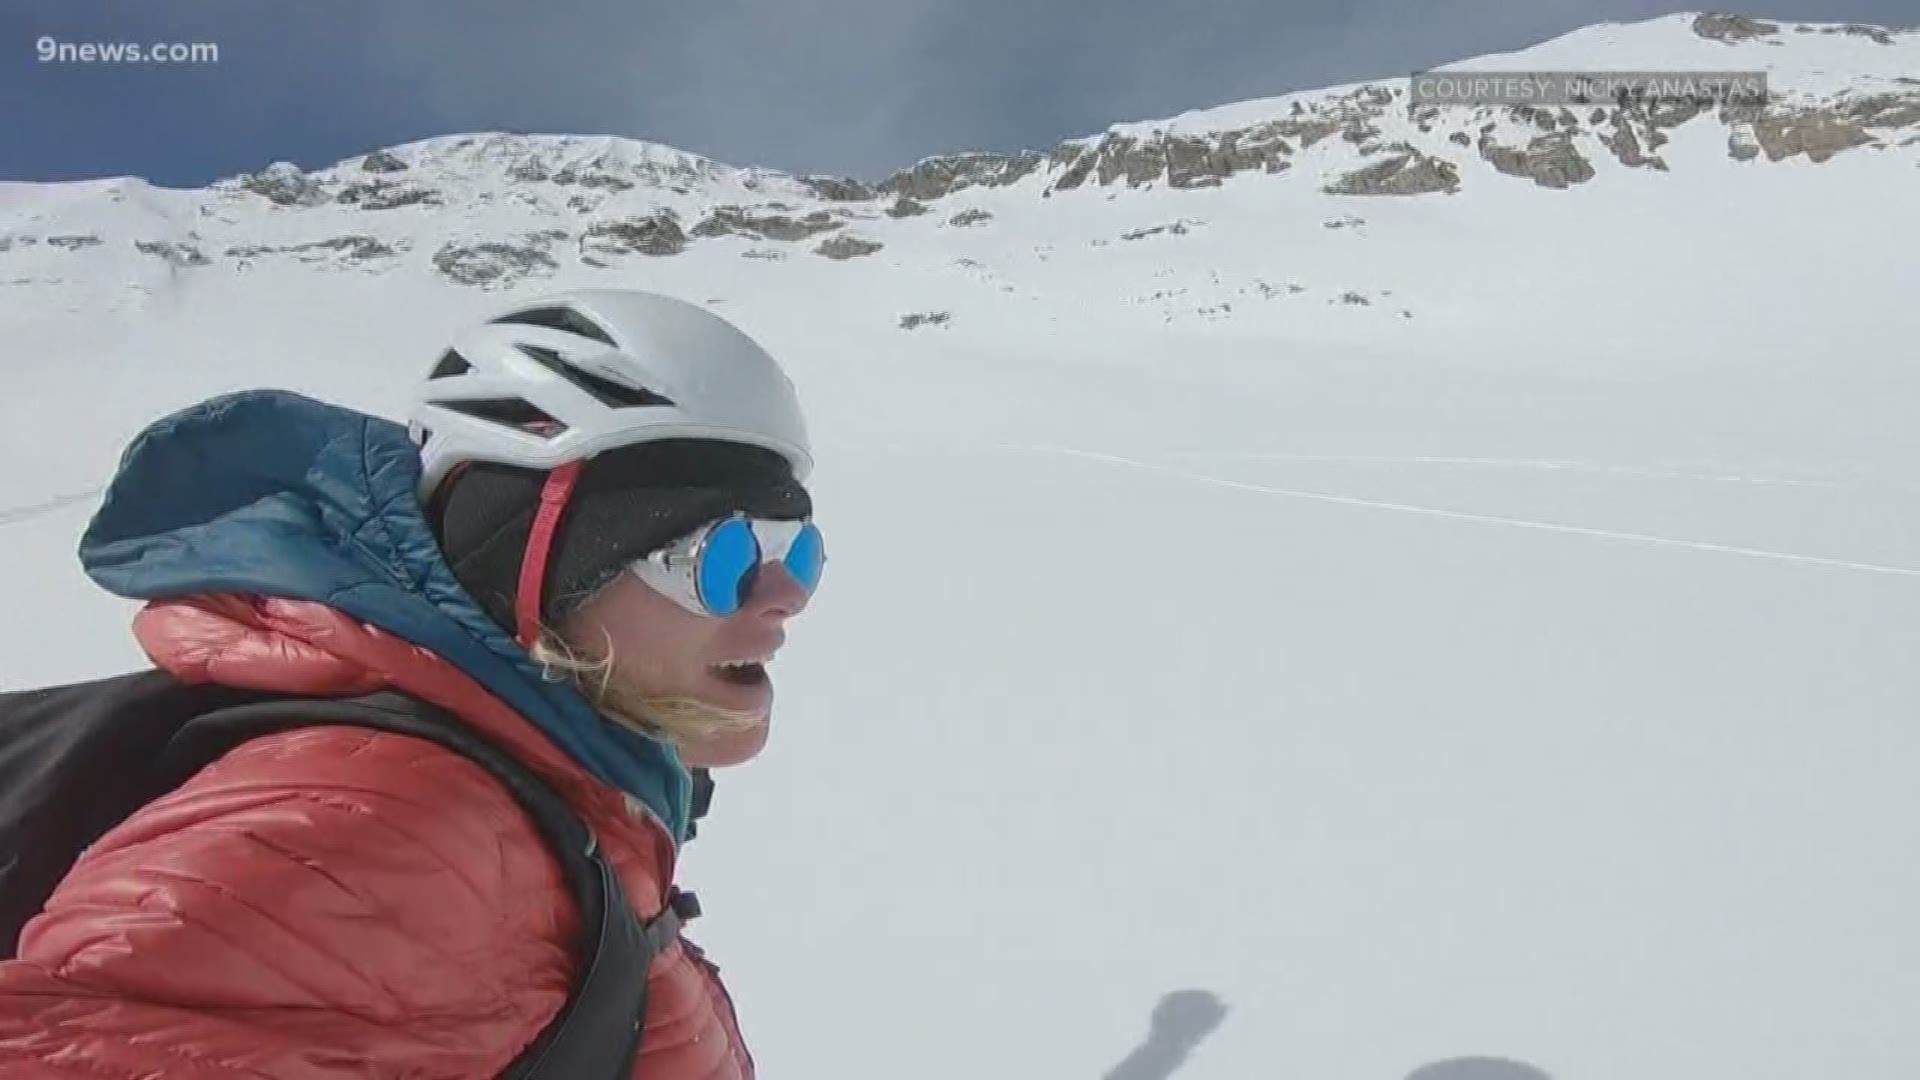 Storytellers: Laura Hadar wants to be the first woman to snowboard down every Colorado 14er